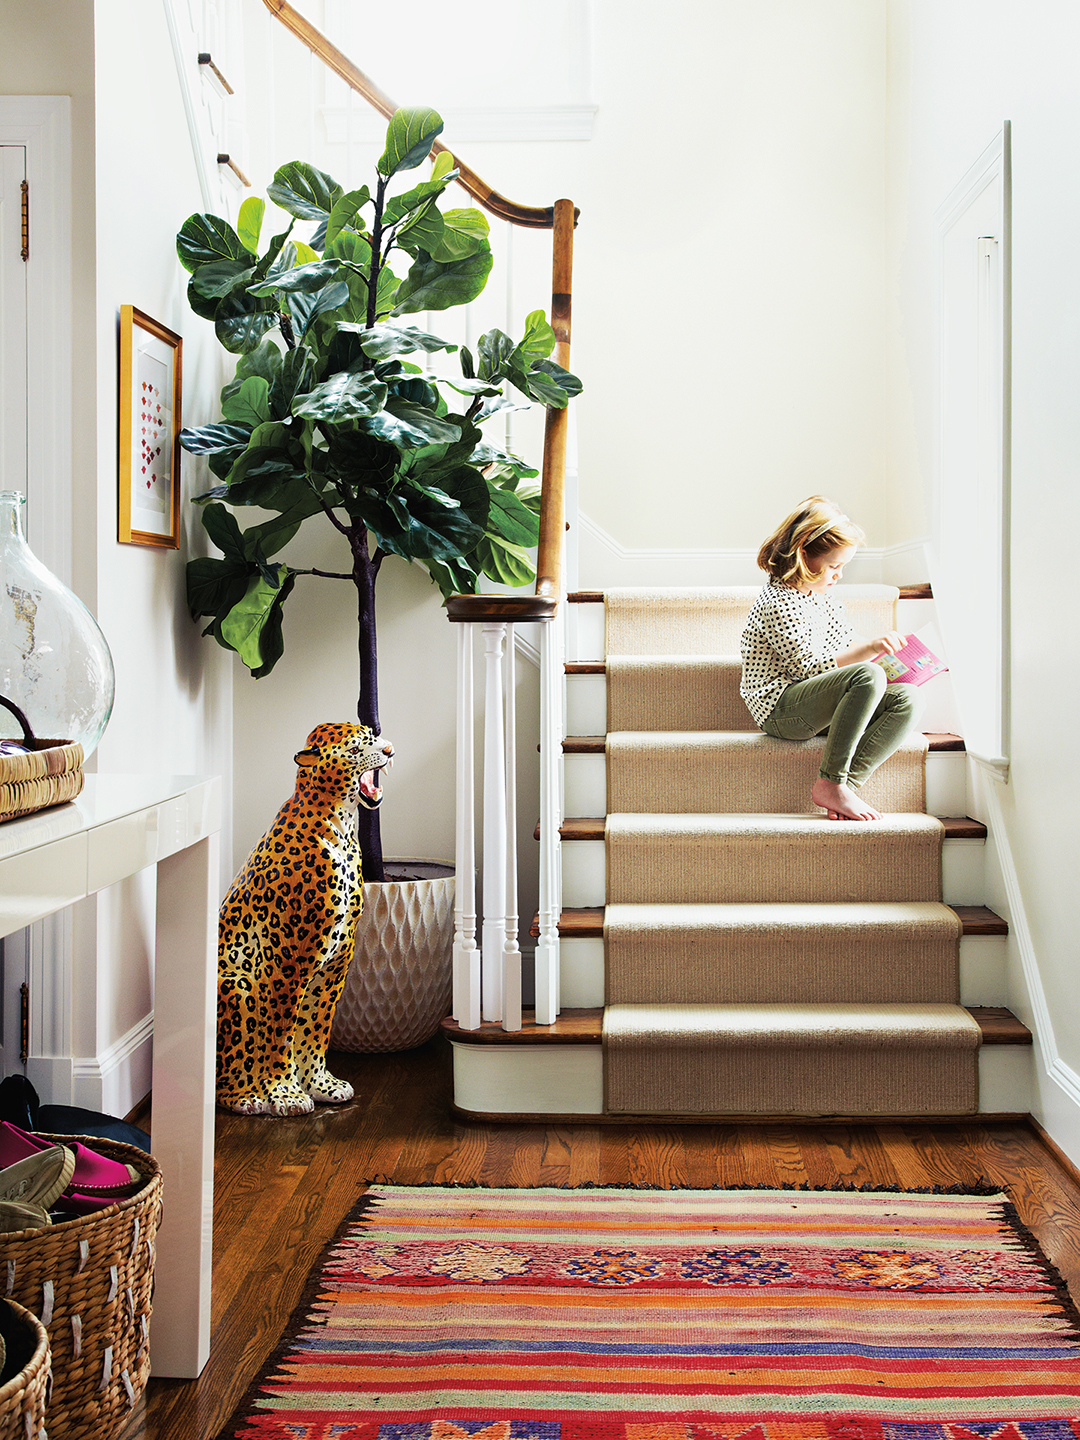 Kid sitting on stairs with leopard statue next to them